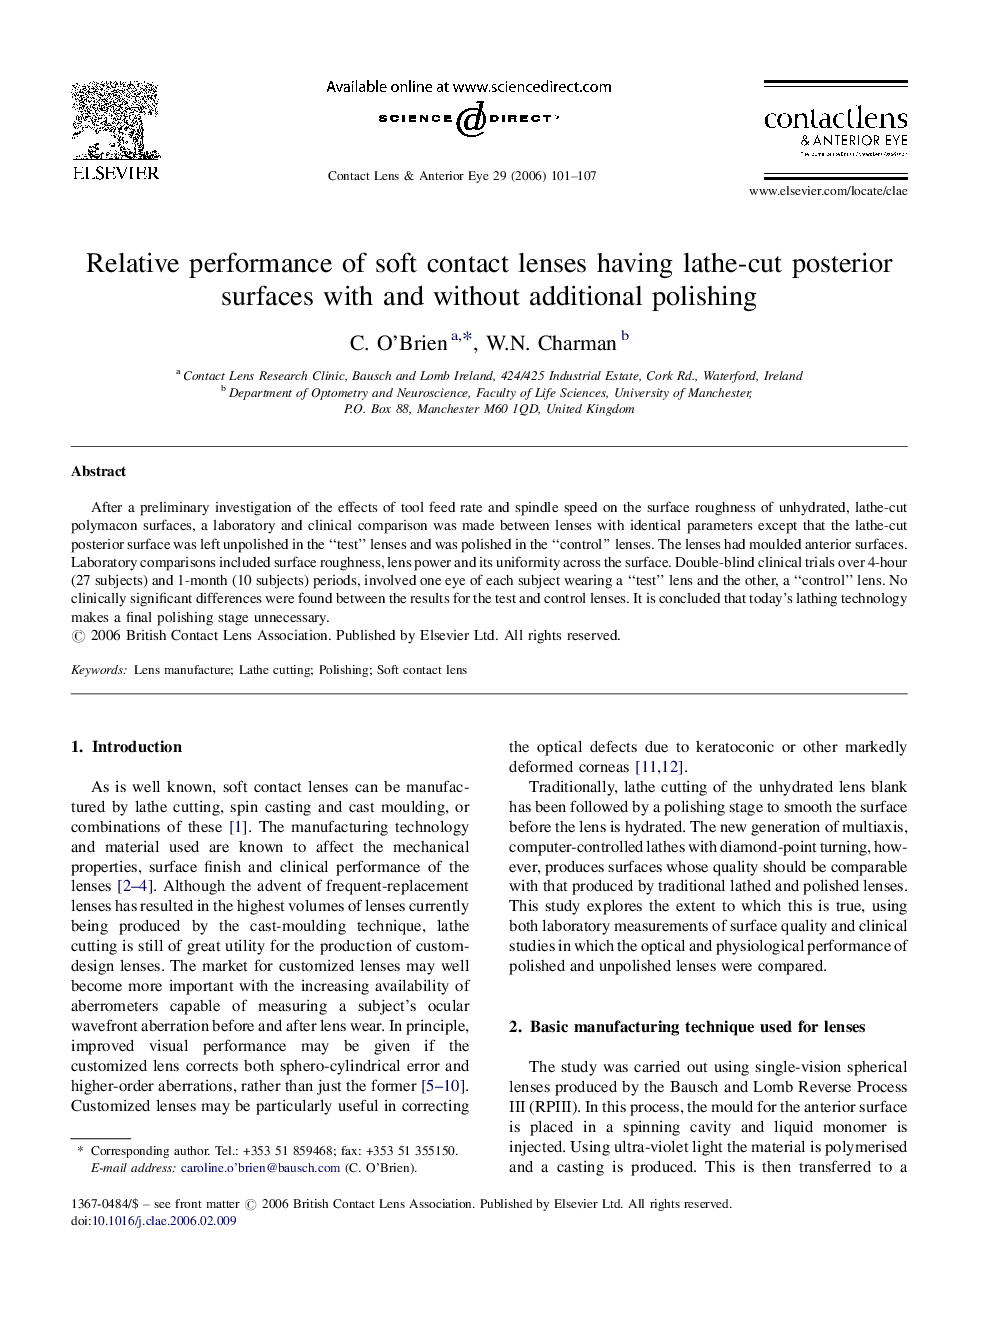 Relative performance of soft contact lenses having lathe-cut posterior surfaces with and without additional polishing